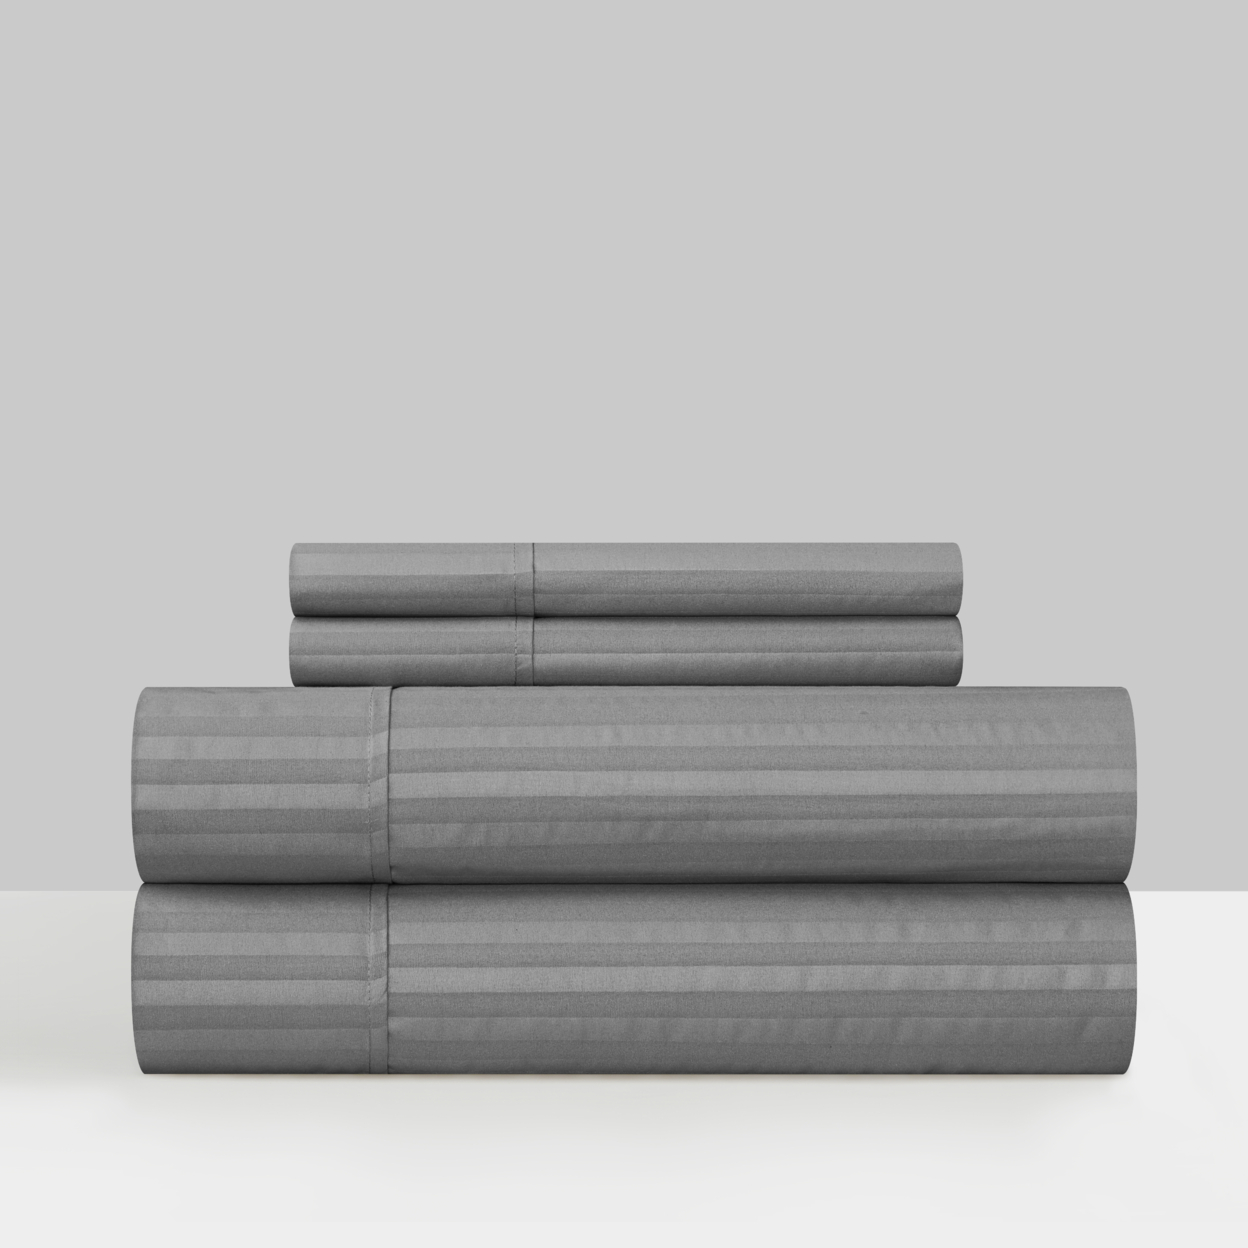 Shina 3 Or 4 Piece Sheet Set Solid Color Striped Pattern Technique - Grey, King